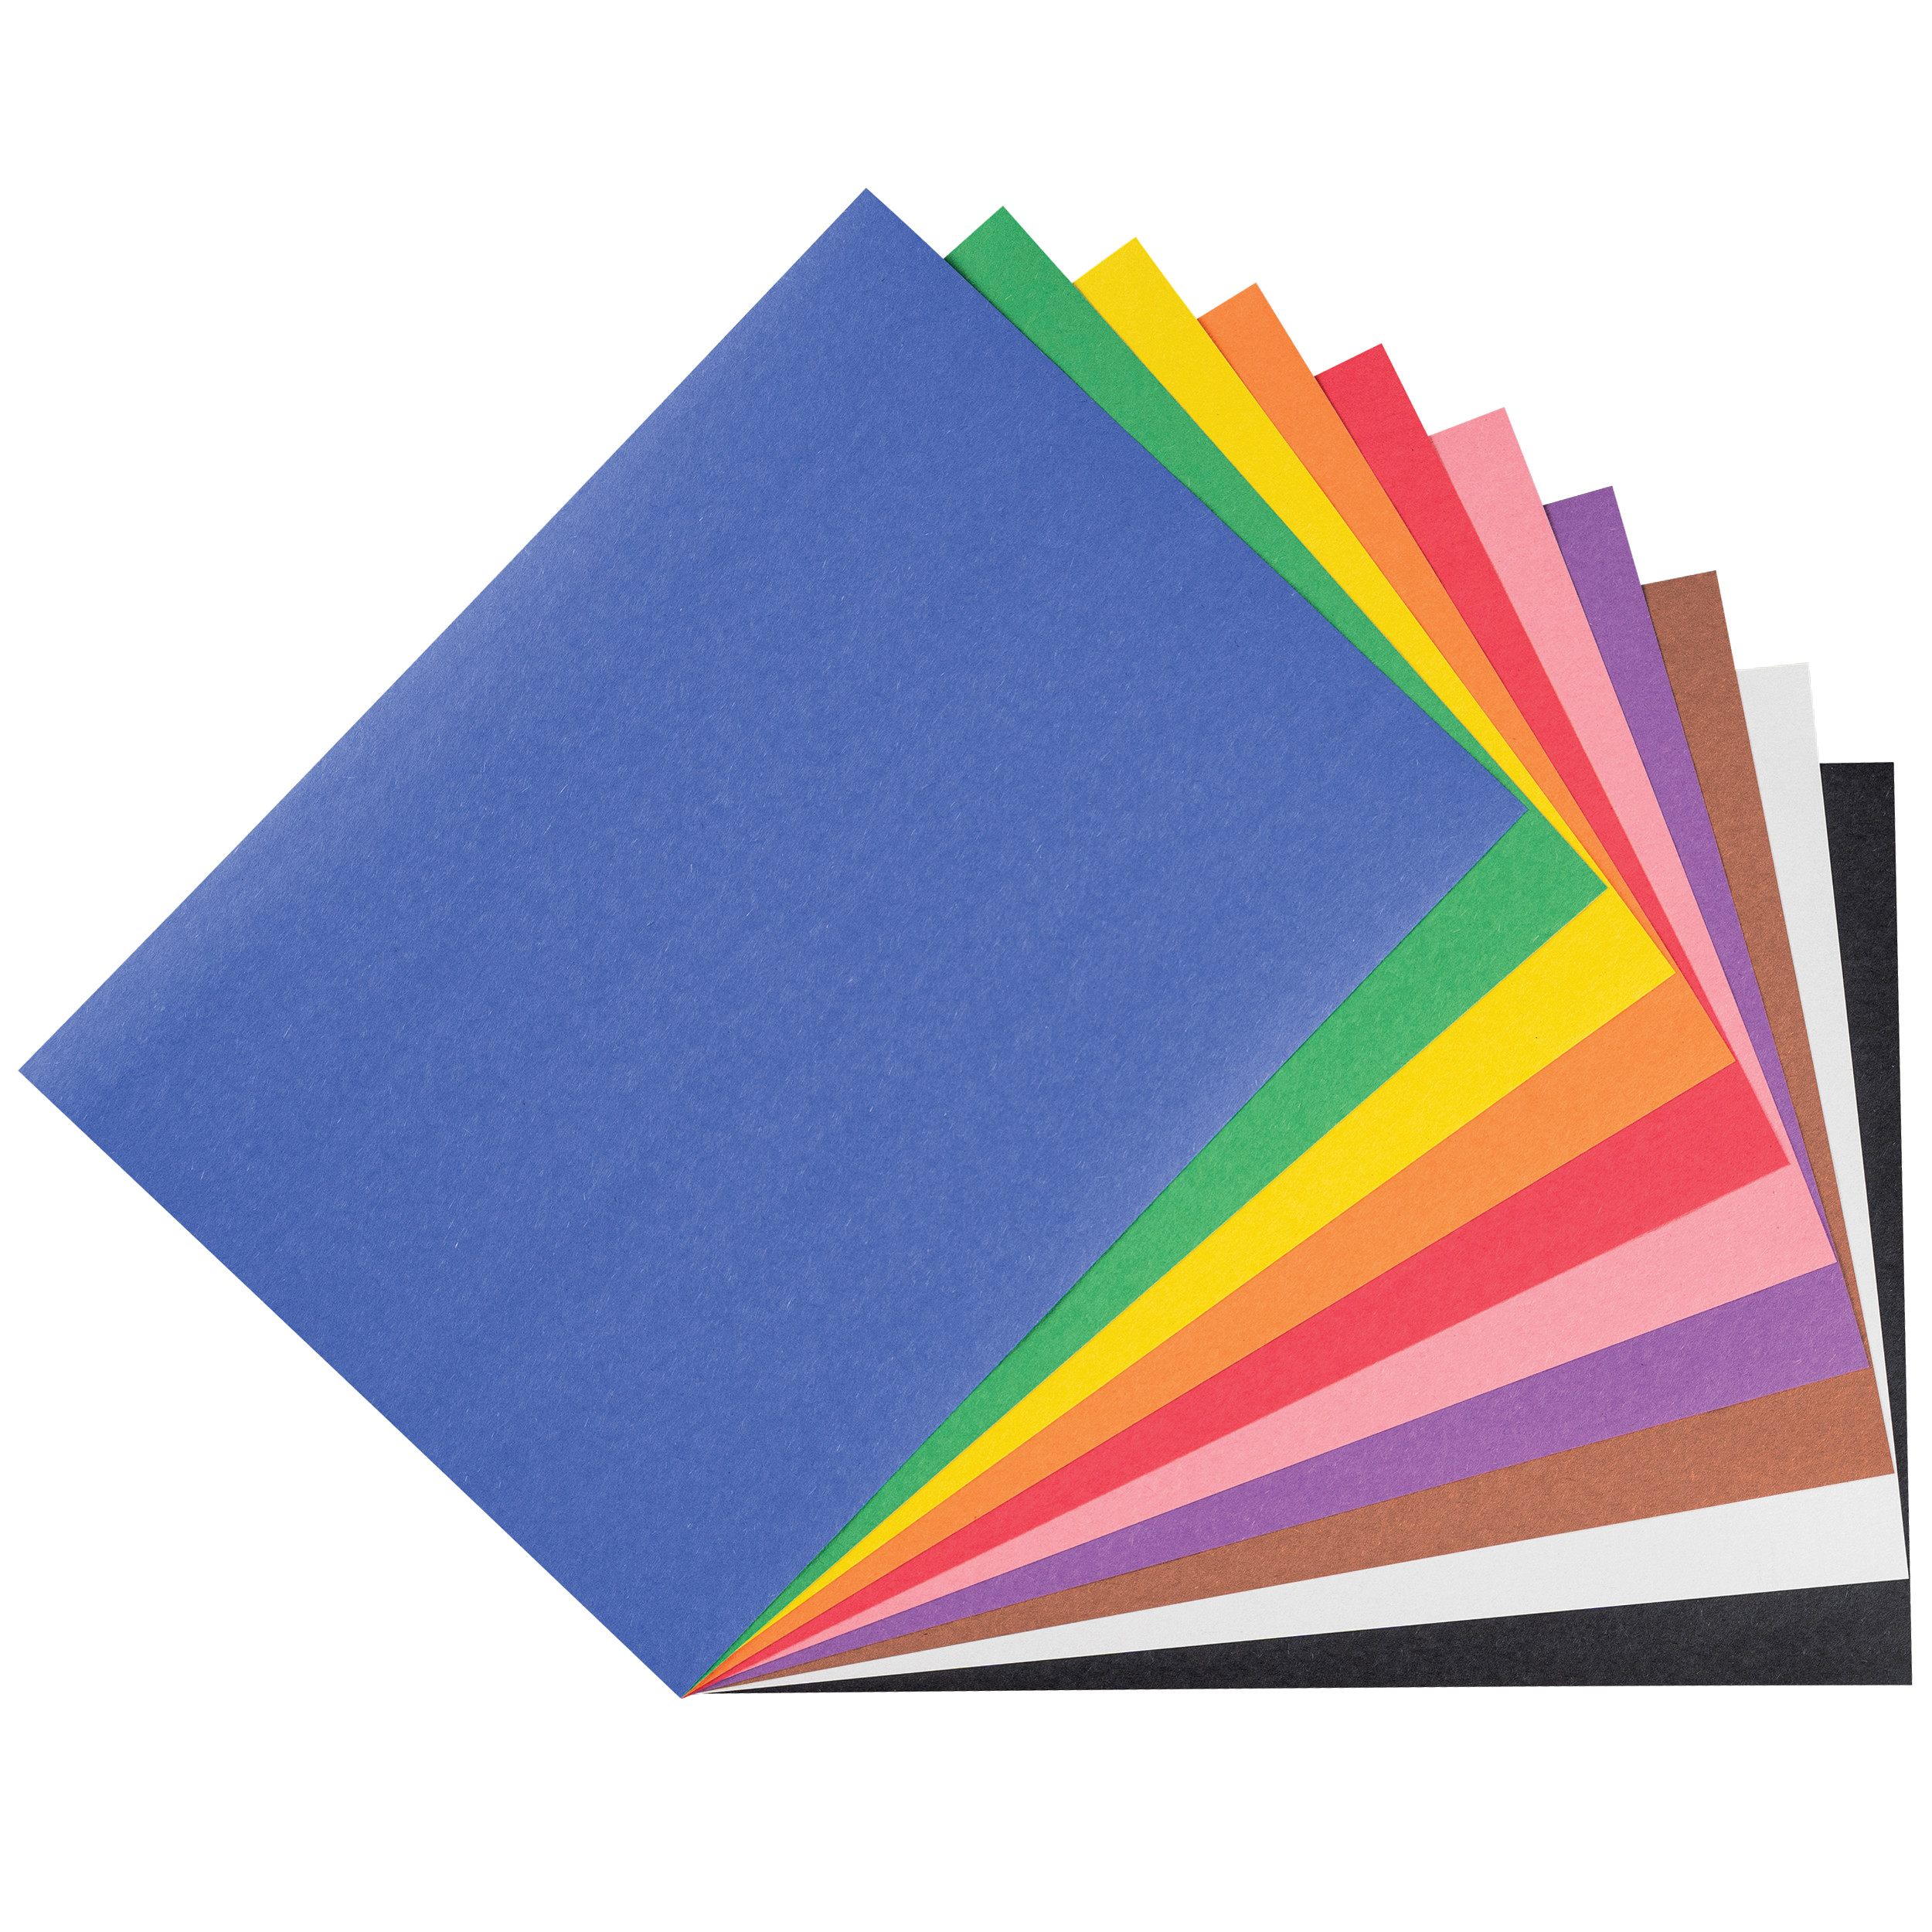 Prang (Formerly SunWorks) Construction Paper White 9 x 12 50 Sheets White  50-Count